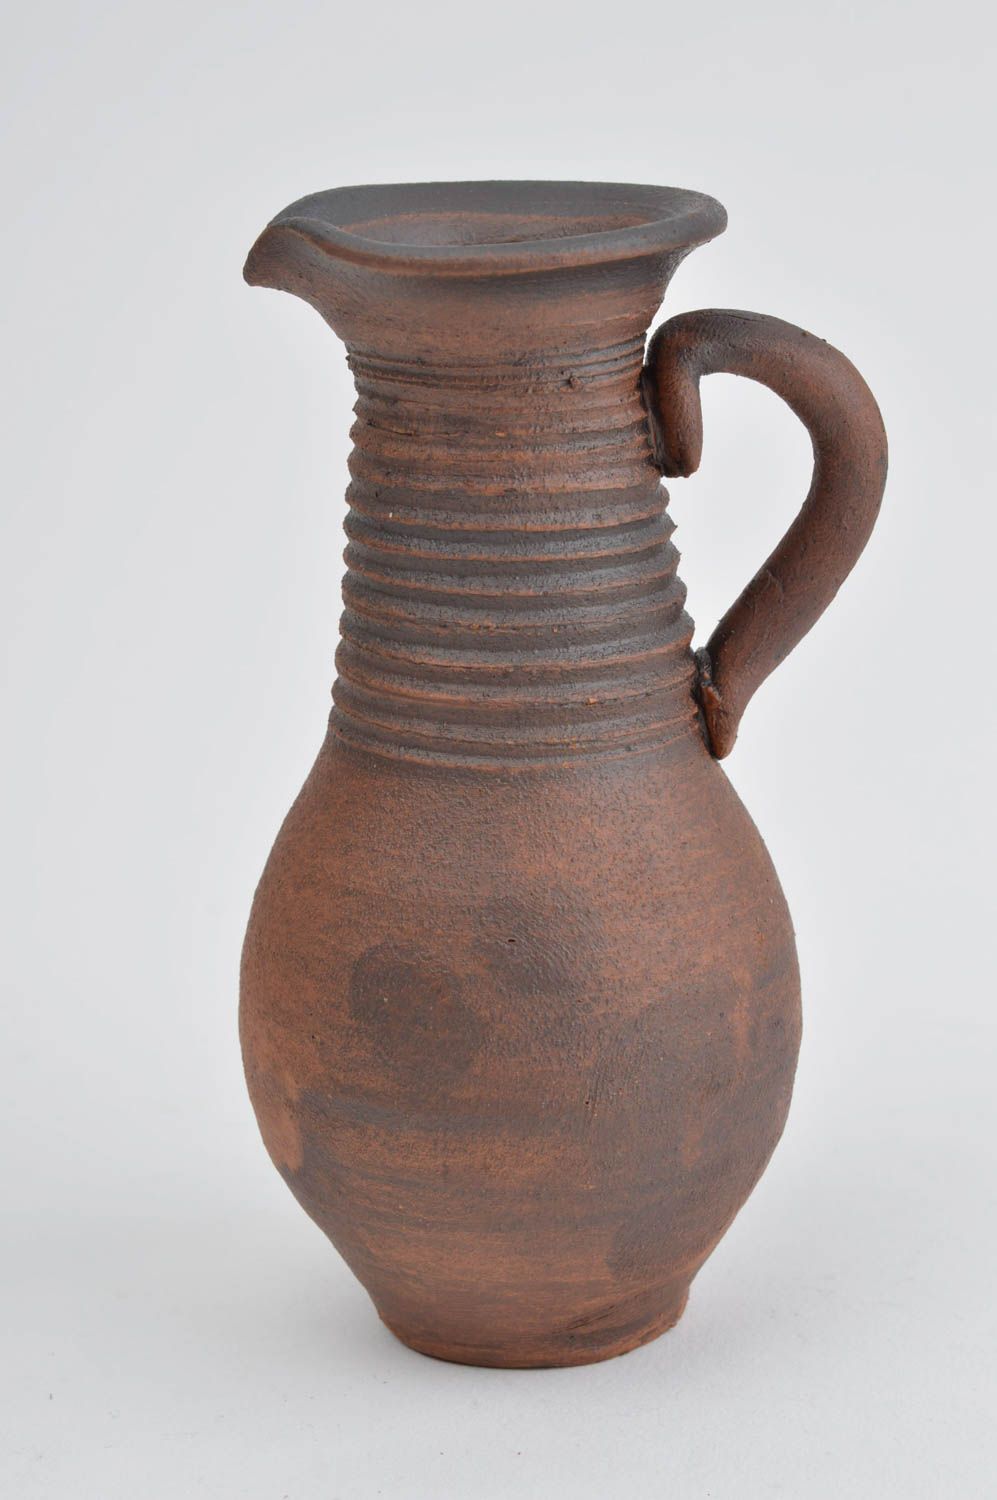 10 oz ceramic wine or wine pitcher with a long neck and handle 1 lb photo 3